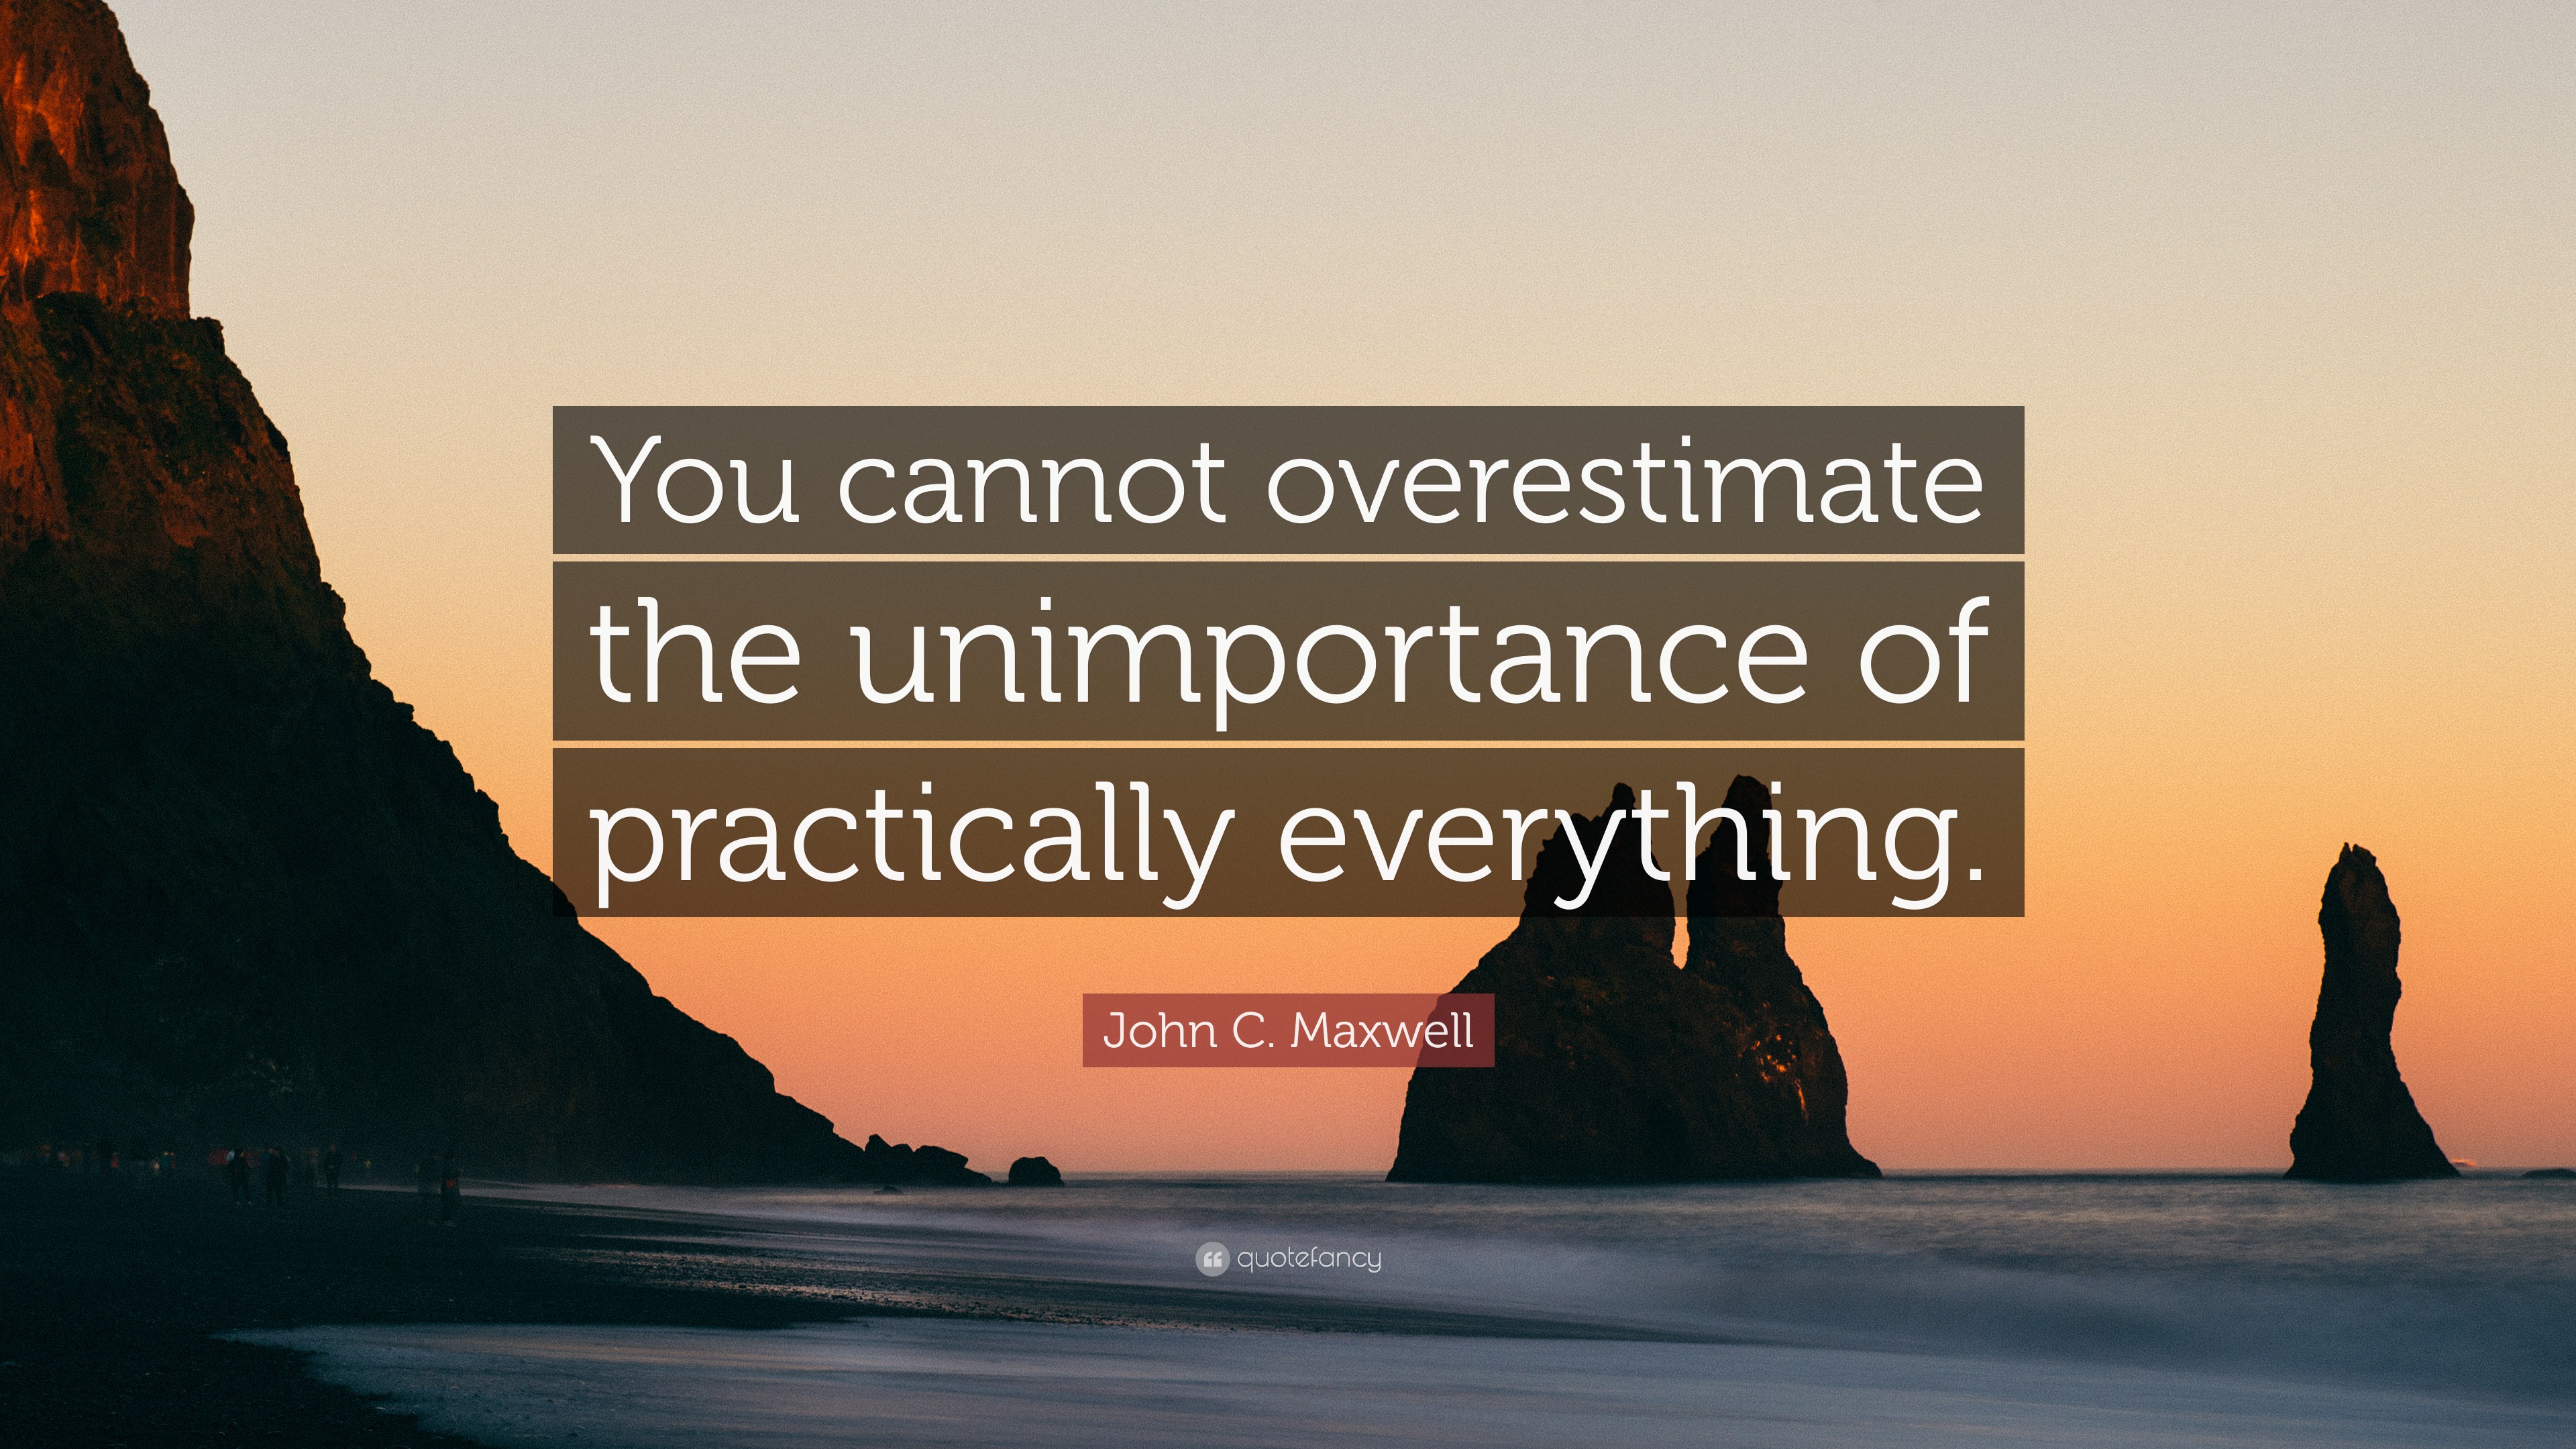 John C. Maxwell Quote “You cannot overestimate the unimportance of